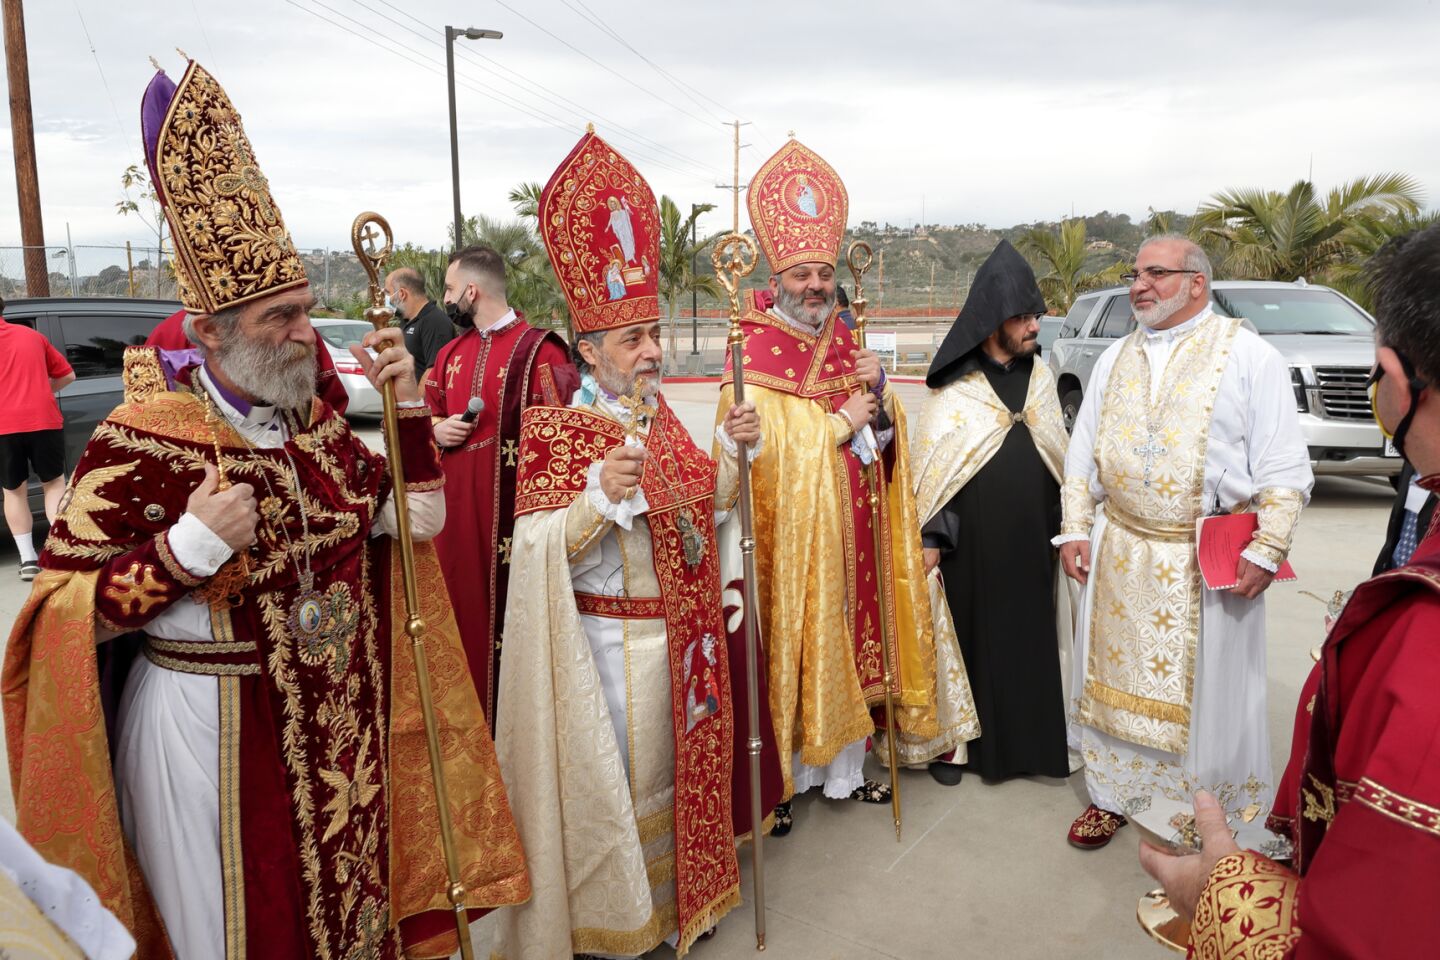 Archbishop Barkev Martirosyan (Former Primate of Artsakh, Armenia), Archbishop Hovnan Derderian (Primate, Western Diocese of Armenian Church), Bishop Bagrat Galastanyan (Primate of the Diocese of Tavush, Armenia), and Father Pakrad Berejekian (Parish Priest, far right in white robe) prepare to preside over the consecration and church naming ceremony at the new Armenian Church in San Diego.